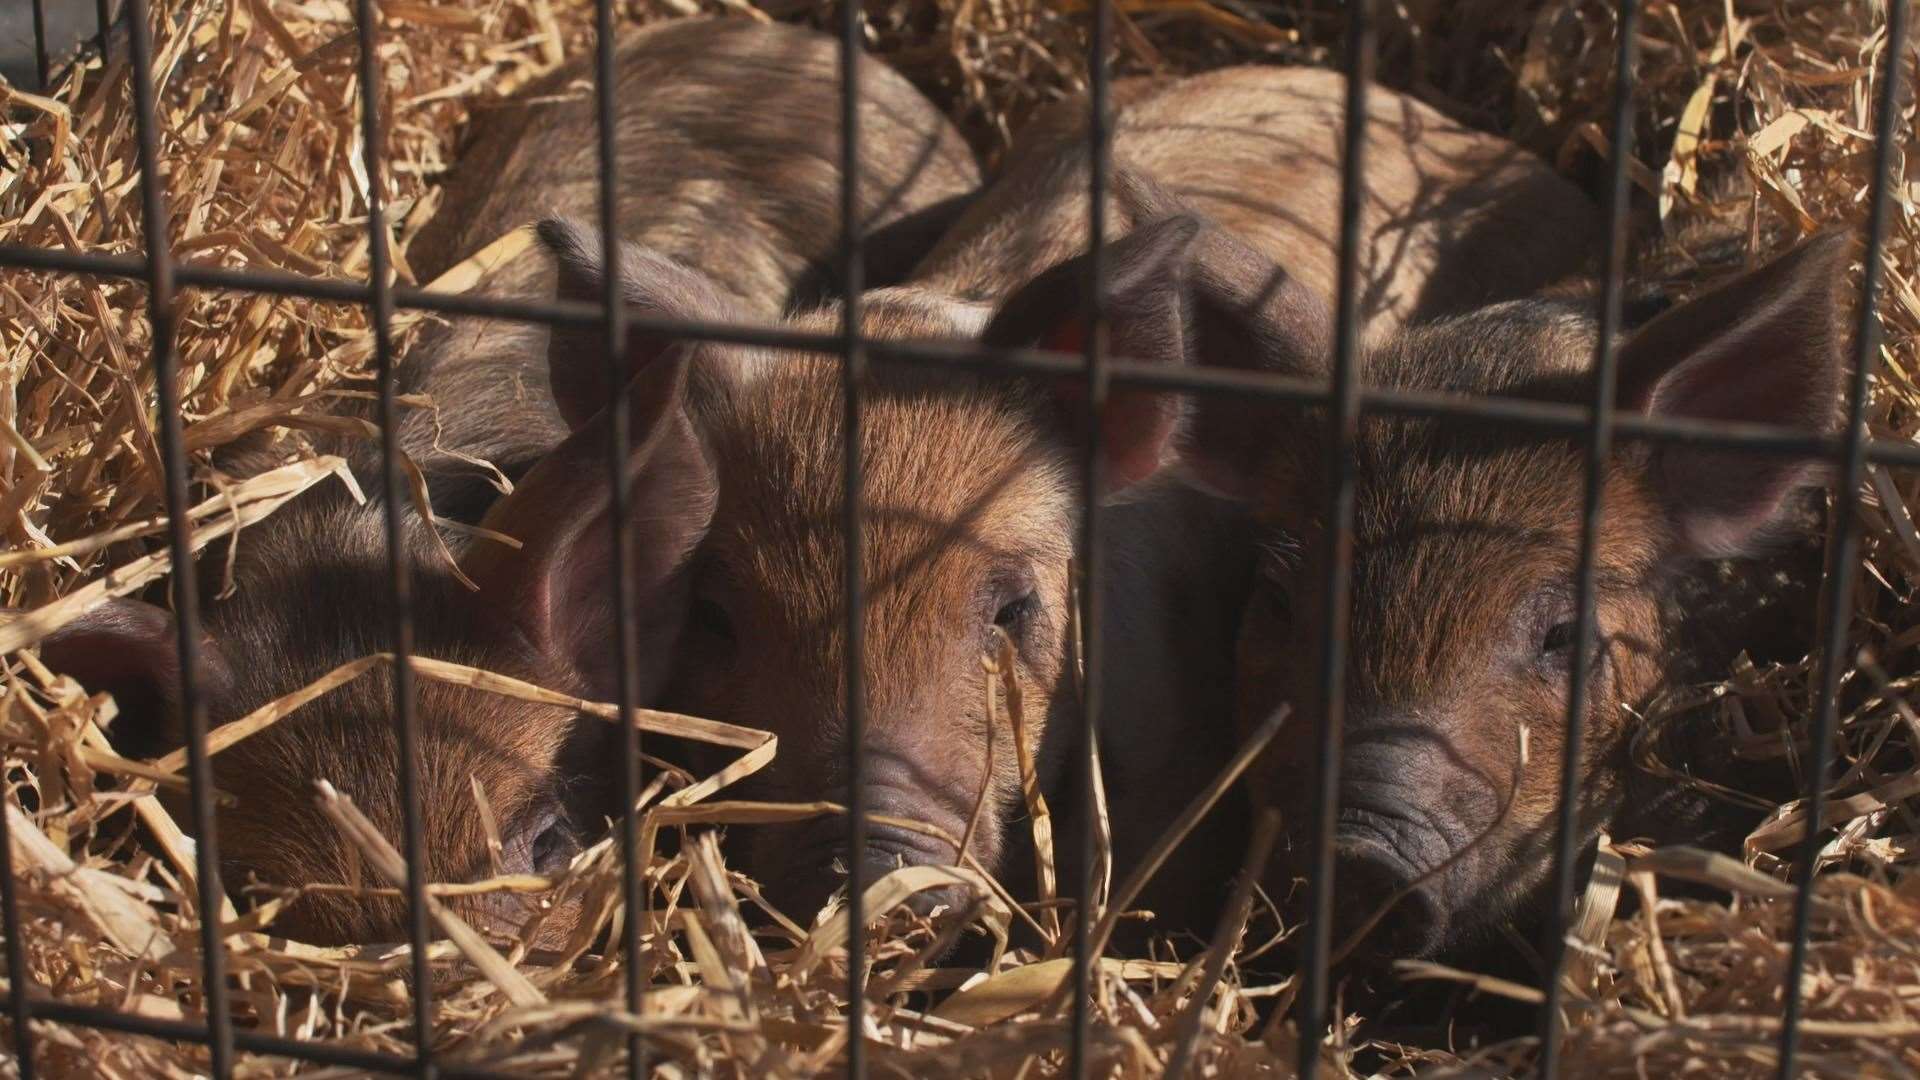 Three little piggies make an appearance in tonight's episode of The Highland Vet. Picture: Daisybeck Studios/MCG